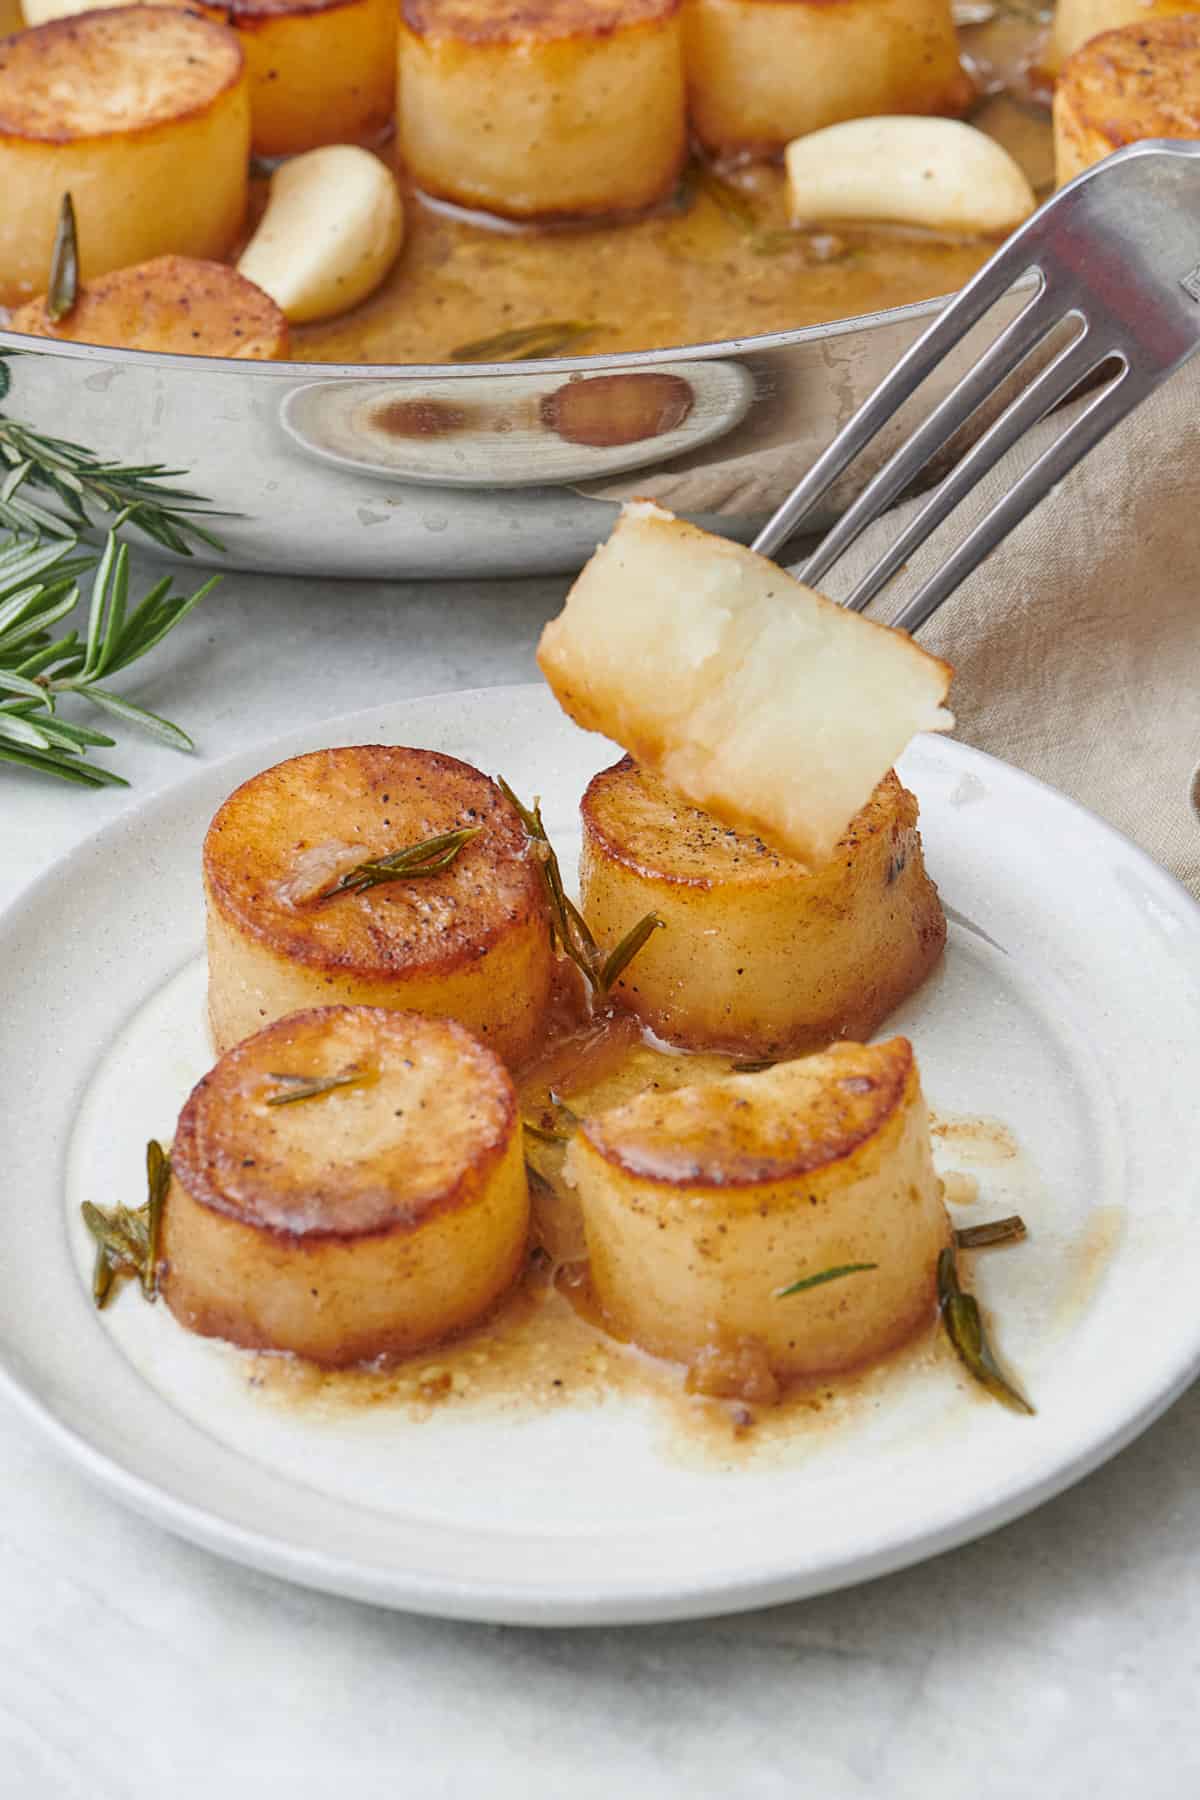 Fondant melting potatoes on a plate with a fork lifting up a piece to show inside texture. Skillet of more nearby.